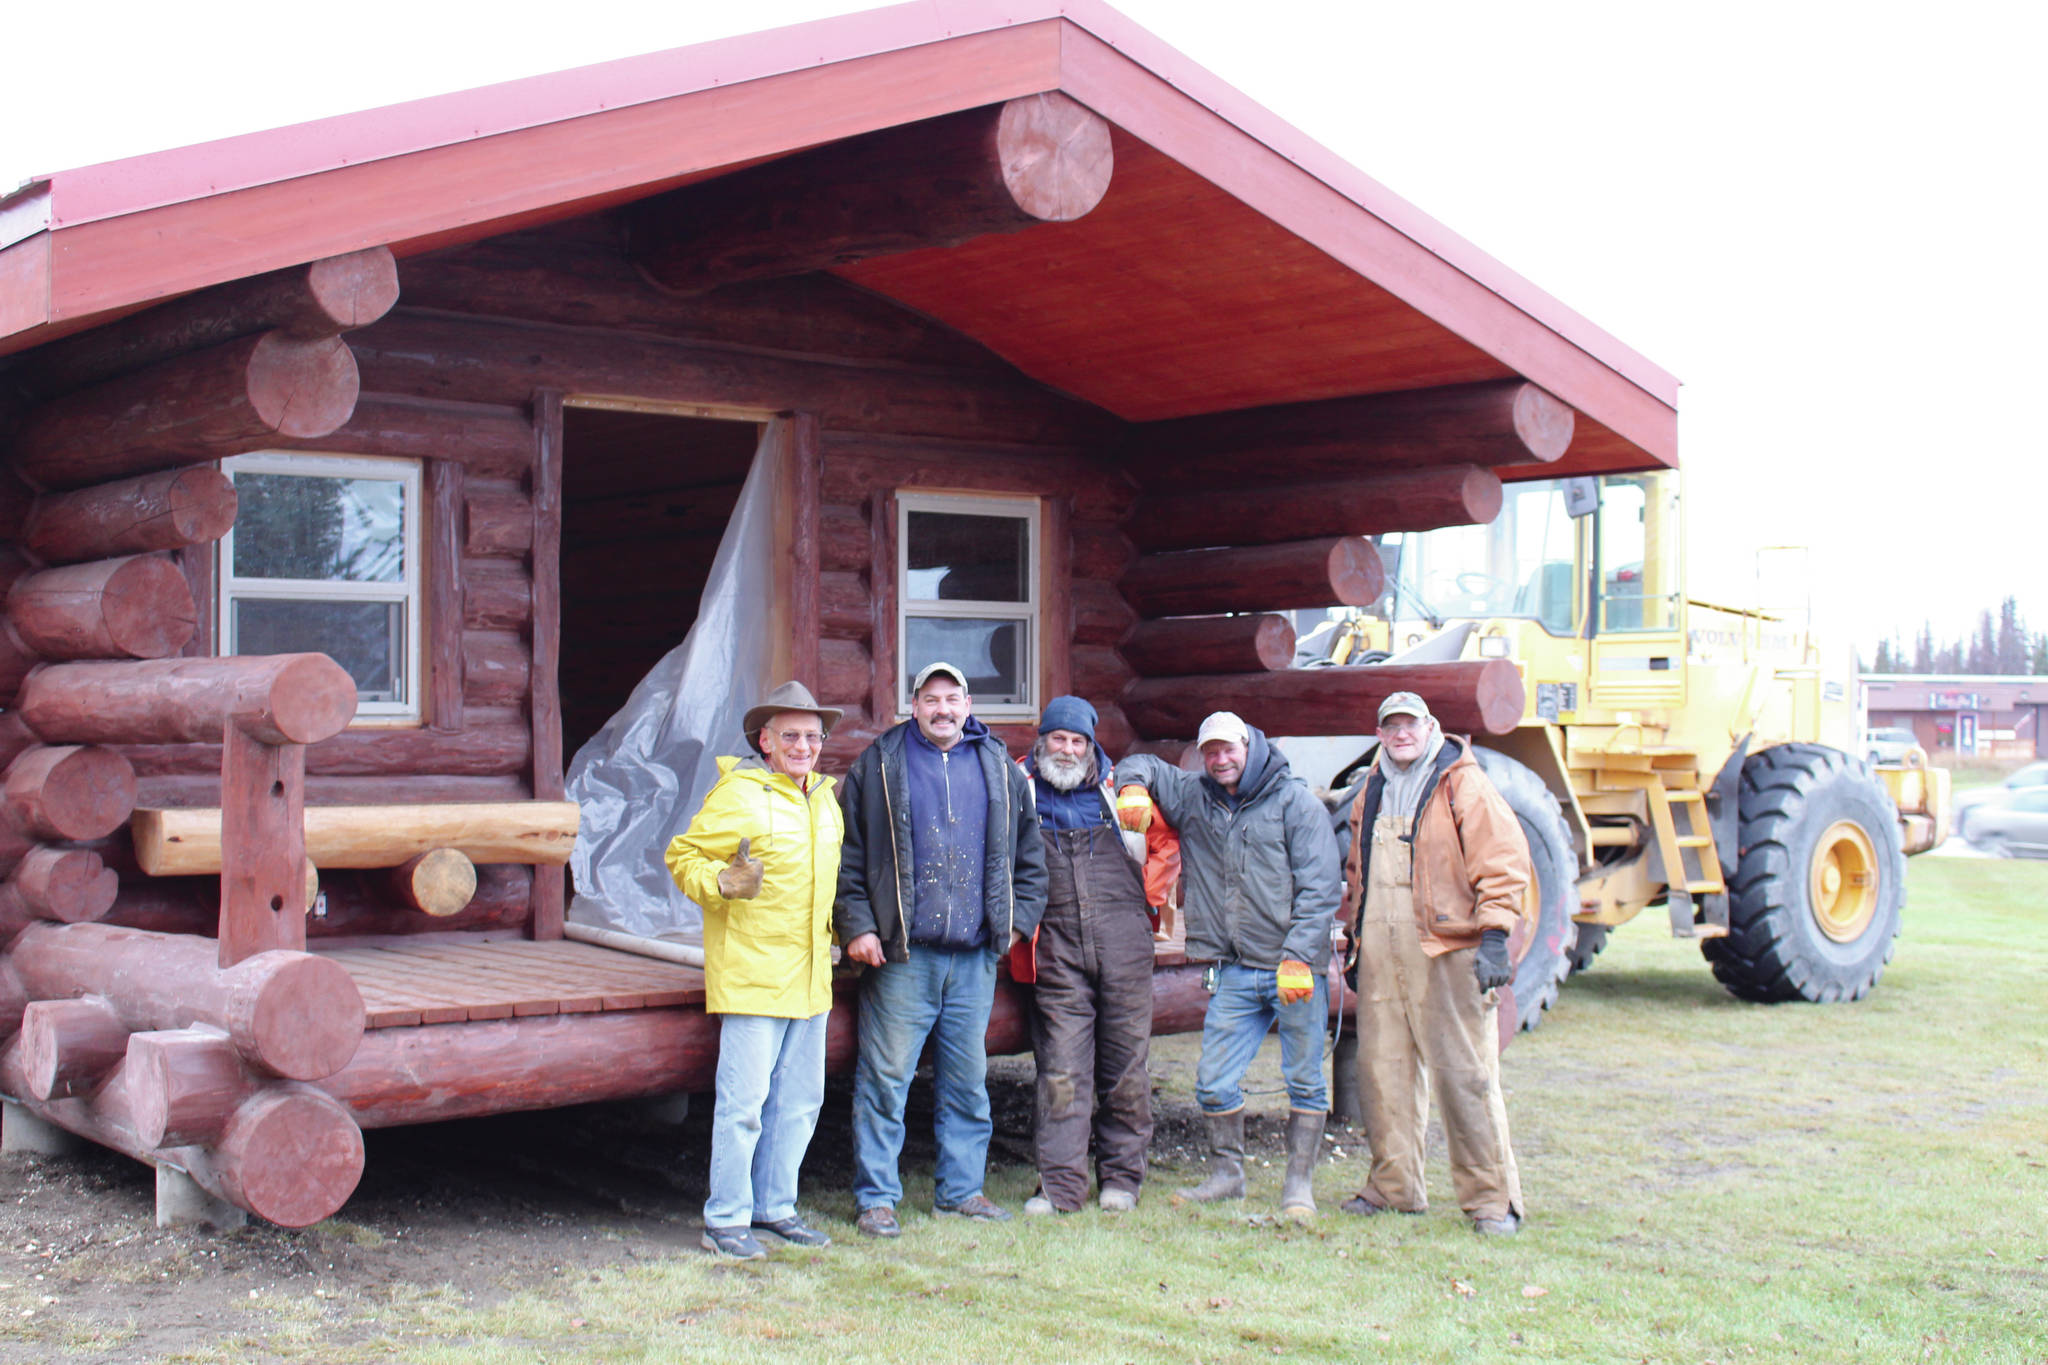 From left, Dr. Peter Hansen, Arnie Sullenger, Darrell Hamby, Tim McGahan and Andrew Conwell stand in front of the new Kenai Bush Doctor’s Historic Cabin on Nov. 13, 2019. Hansen died March 25, 2021. (Photo by Brian Mazurek/Peninsula Clarion)